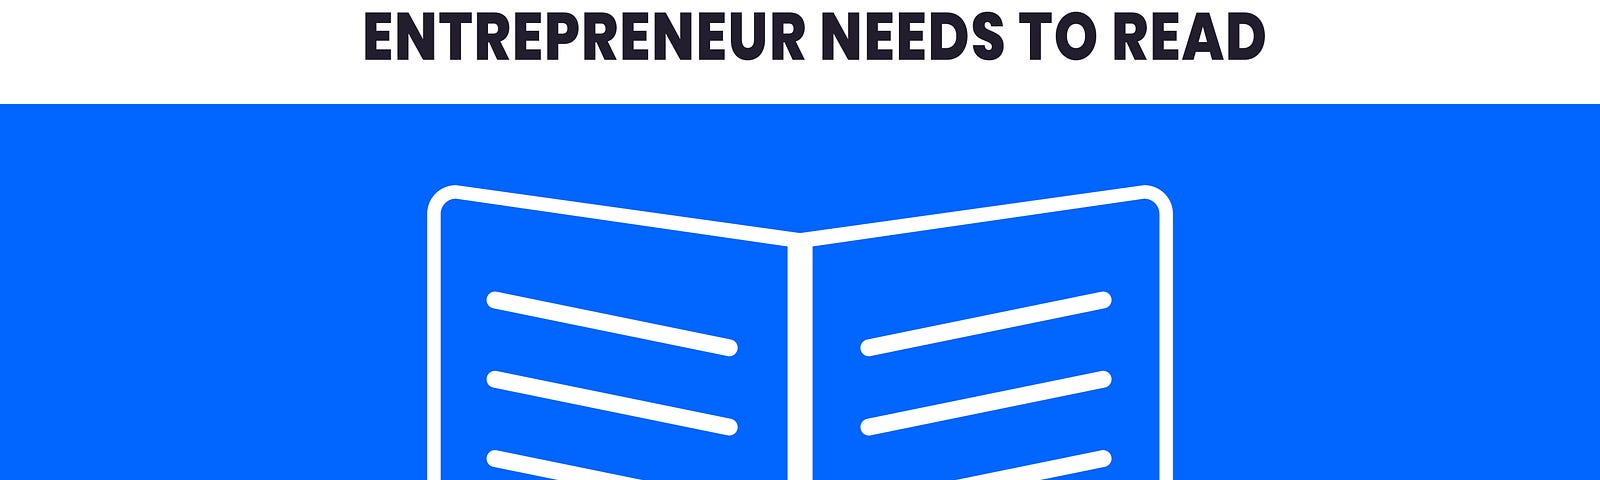 7 books every entrepreneur has to read